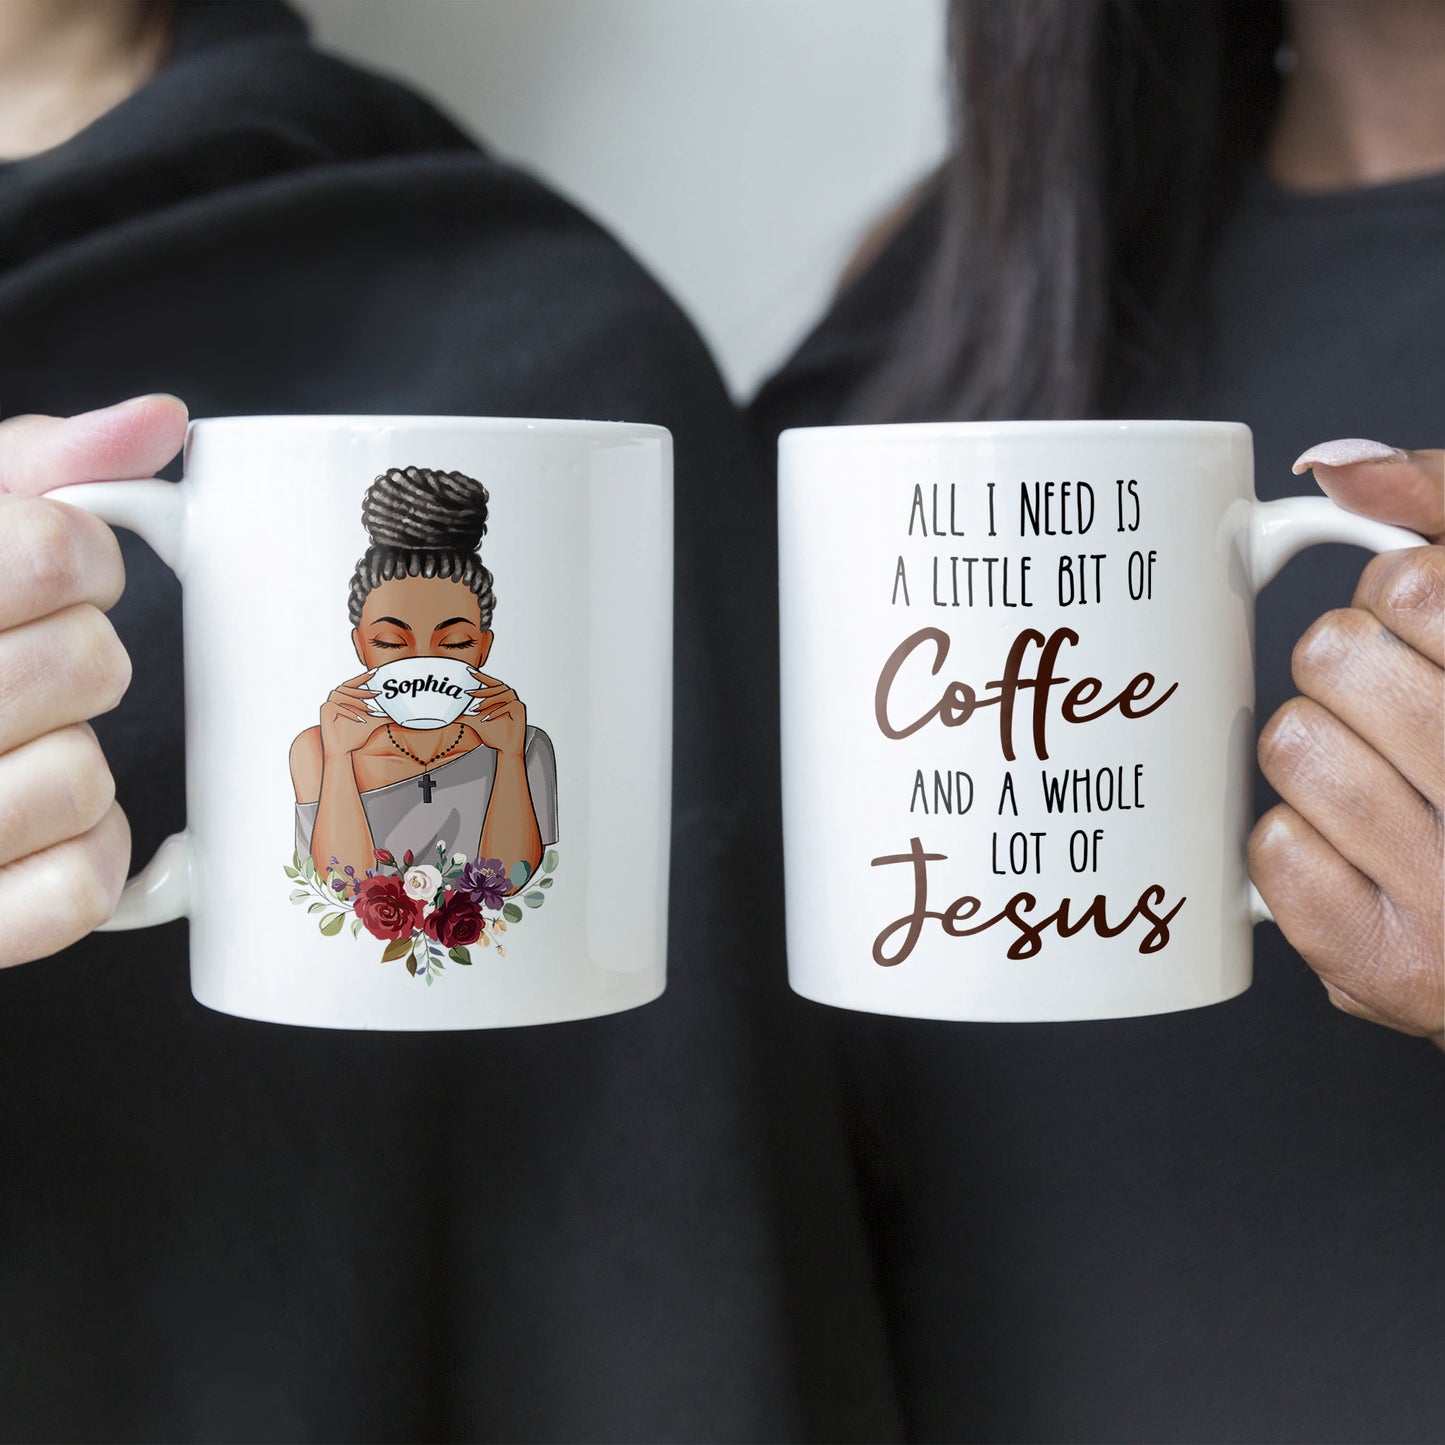 All I Need Is A Little Bit Of Coffee And A Whole Lot Of Jesus - Personalized Mug - Birthday & Christmas Gift For Her, Girl, Woman